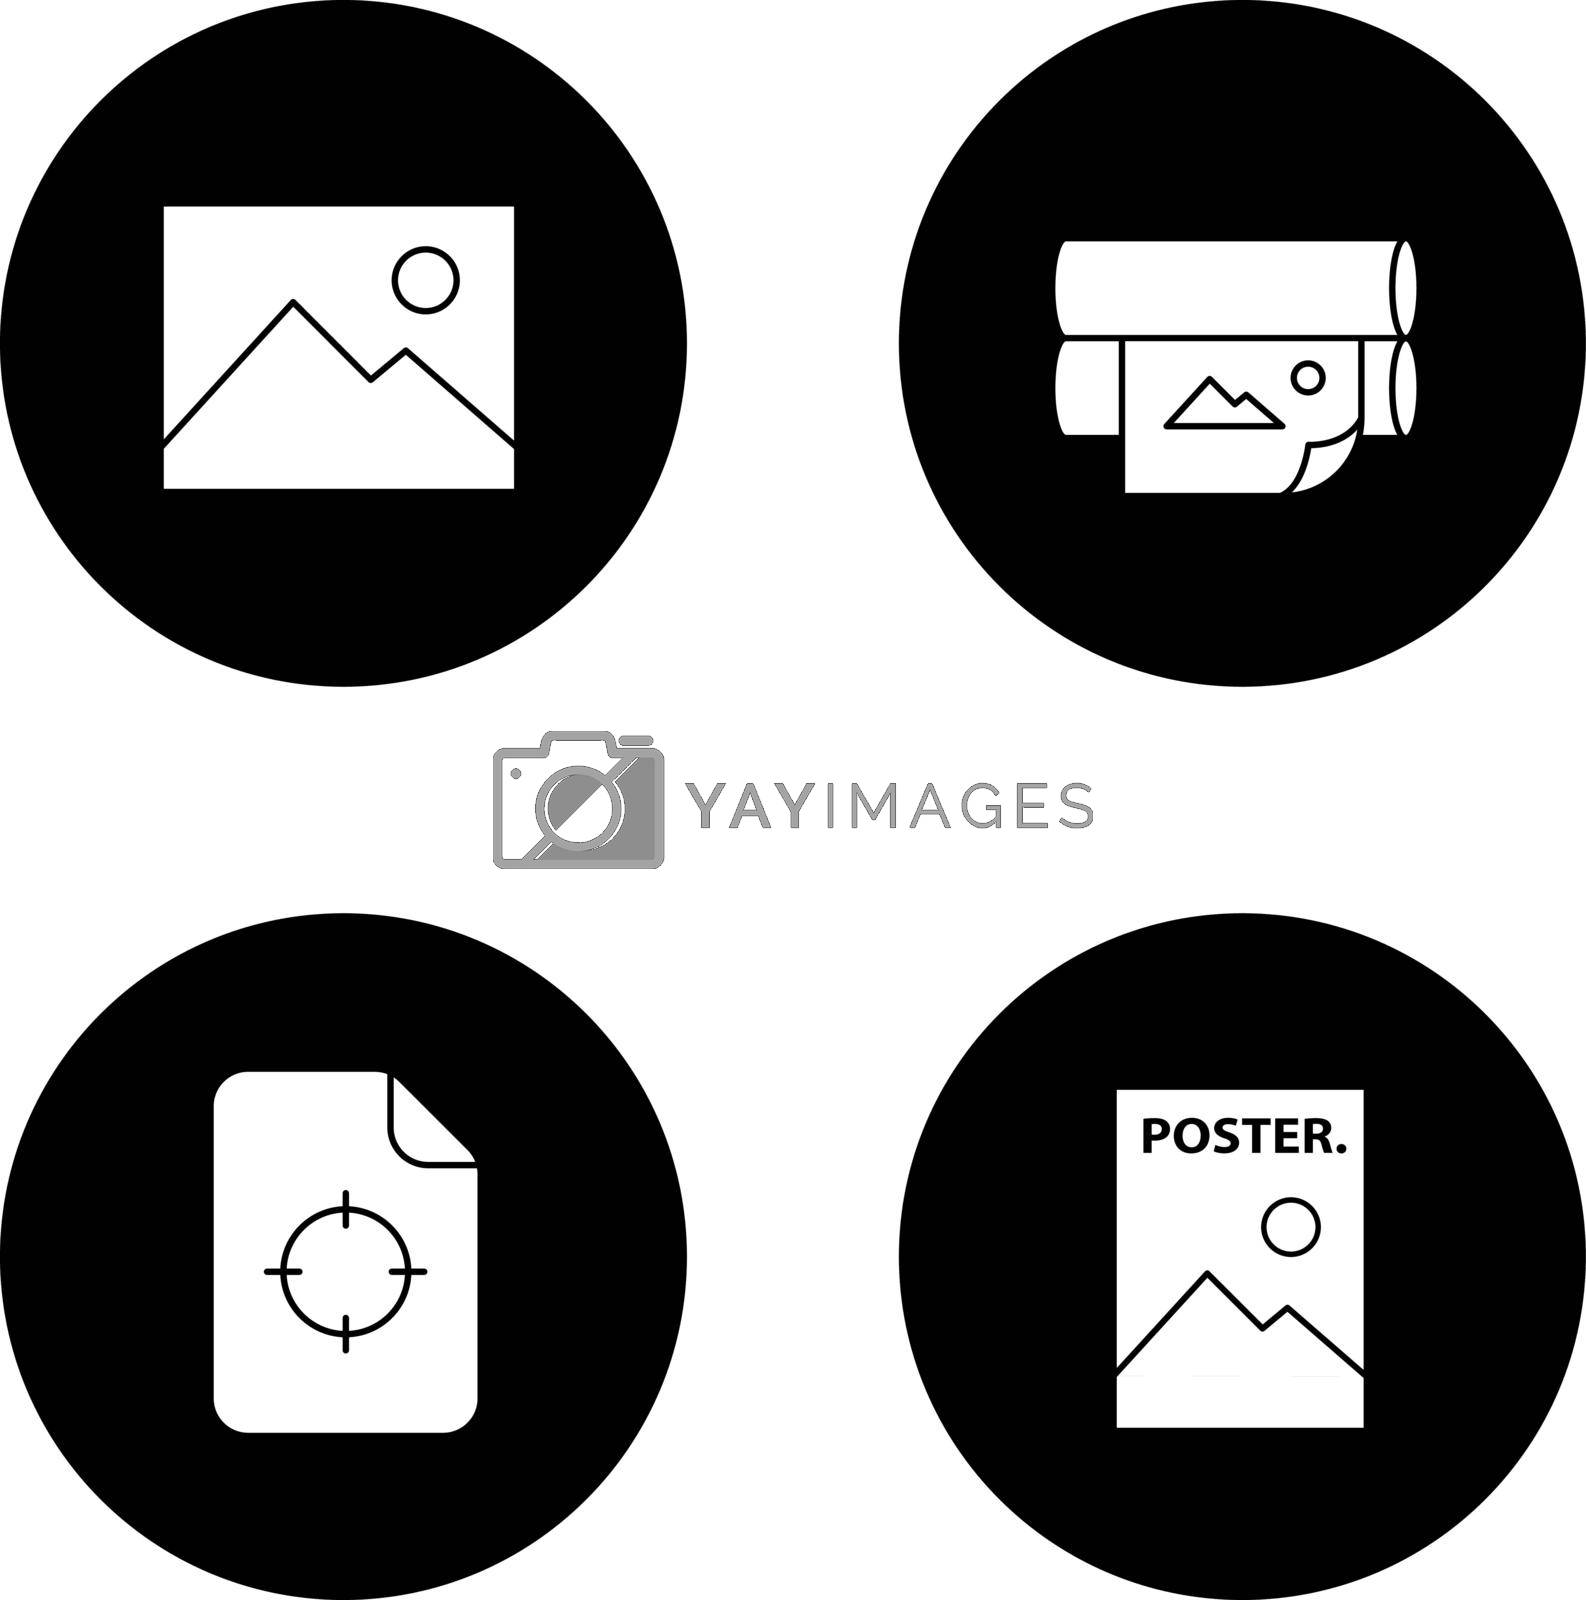 Royalty free image of Printing glyph icons set by bsd